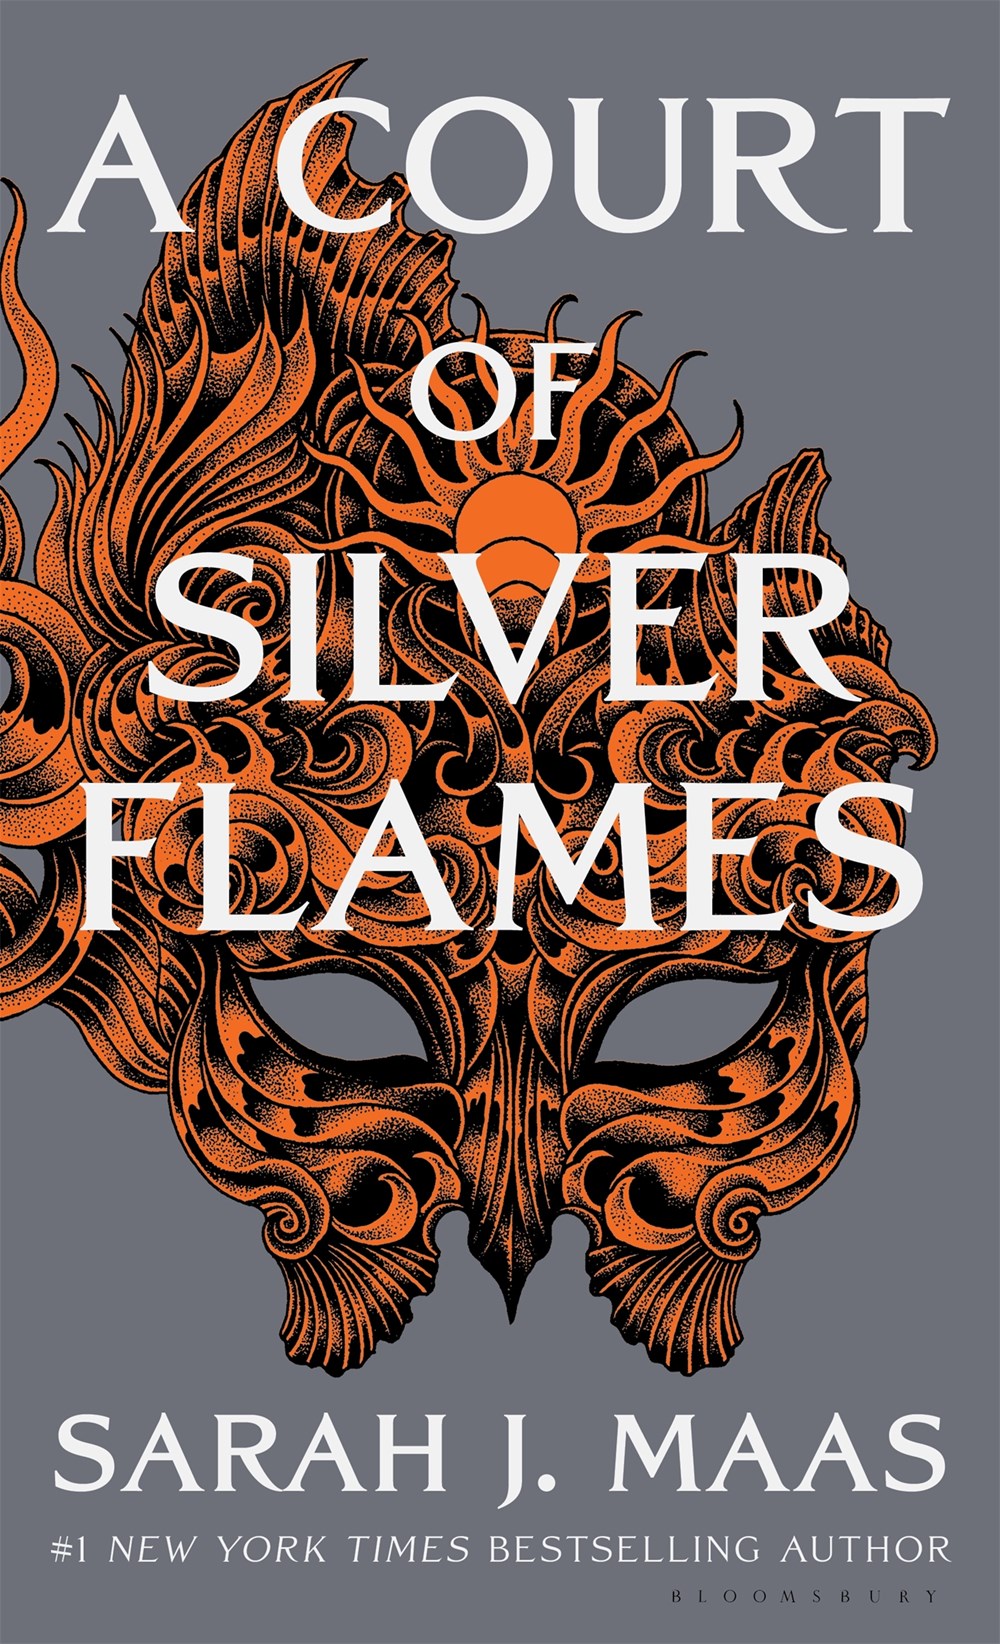 Read-Alikes for  “A Court of Silver Flames” by Sarah J. Maas | LibraryReads